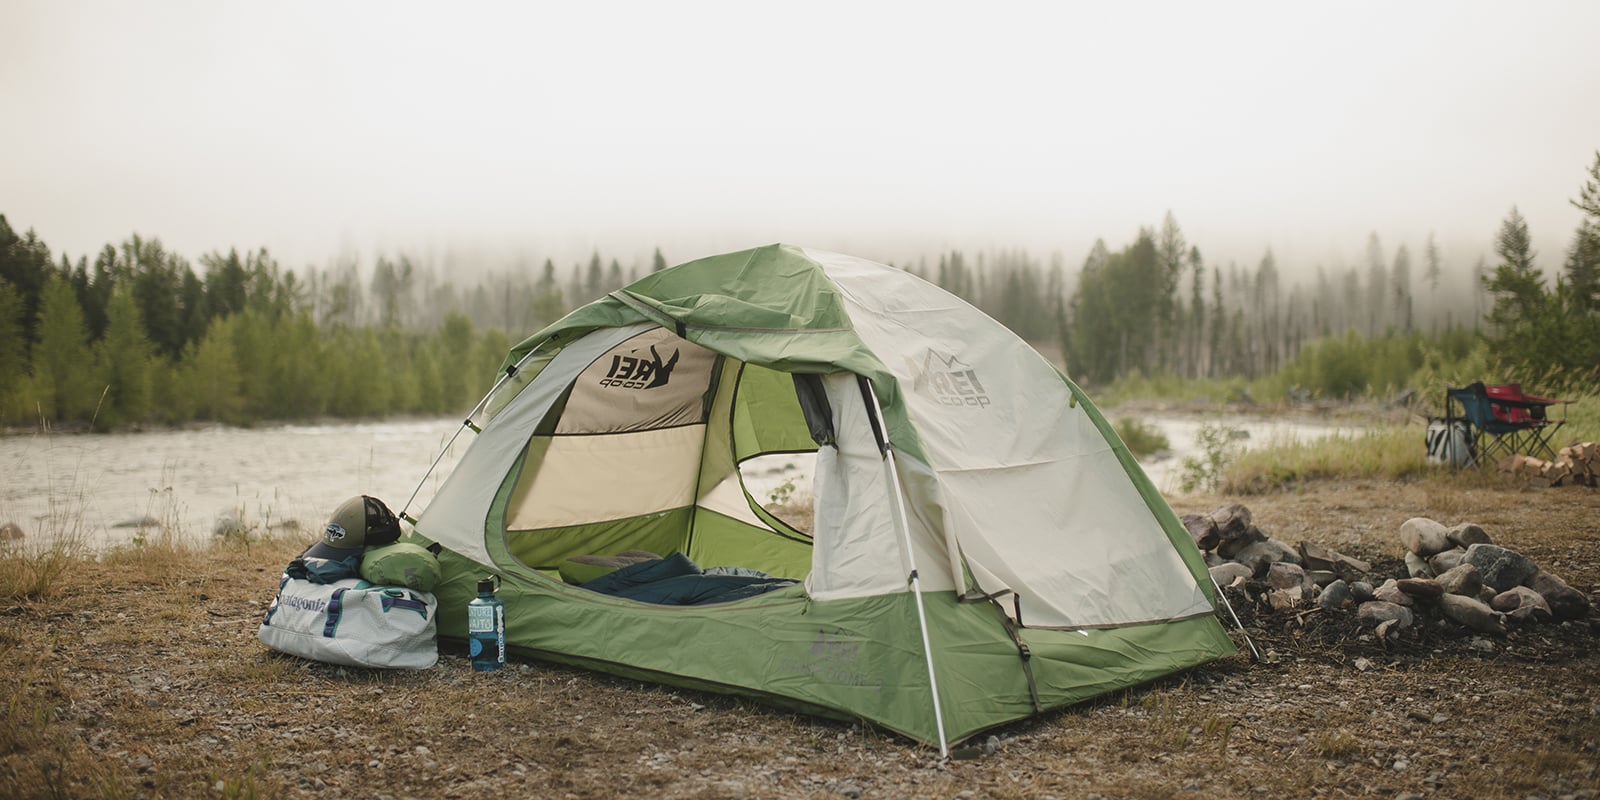 How to choose the best tents?